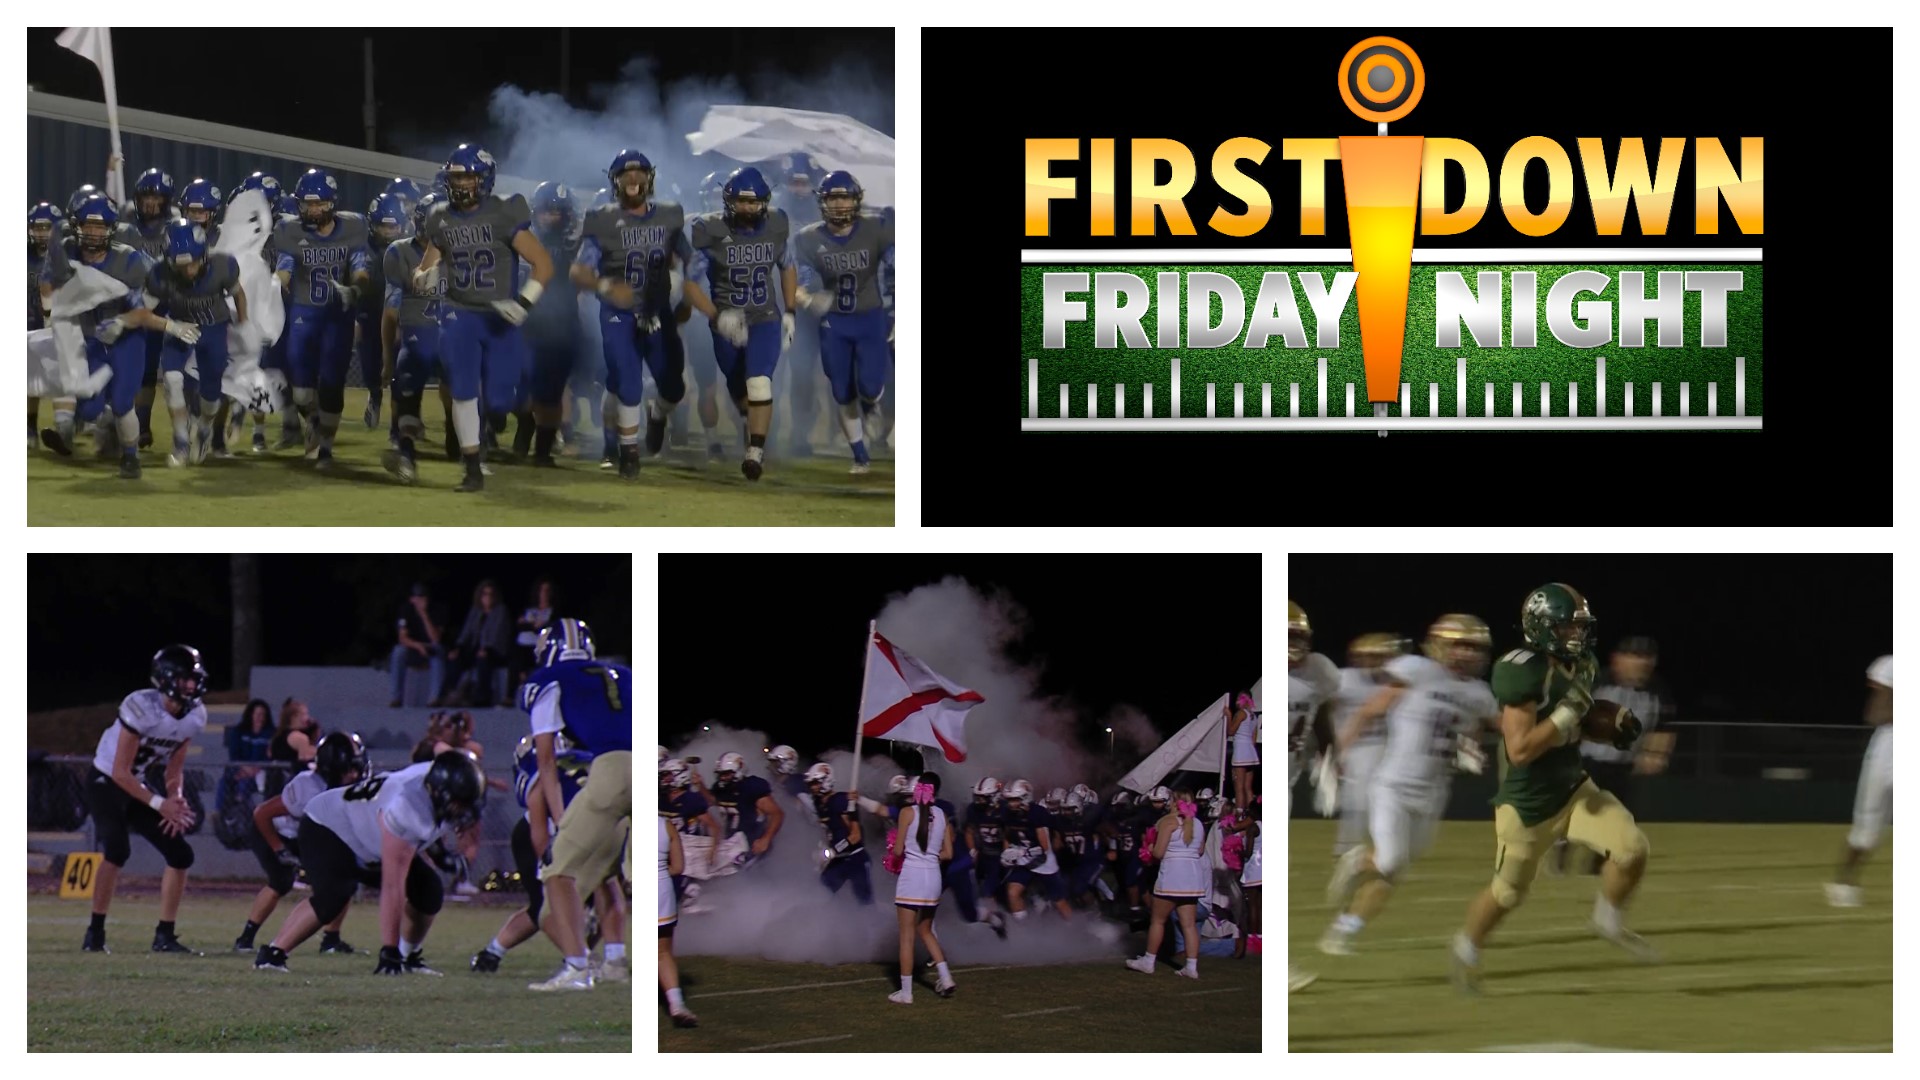 More region championships and playoff spots were on the line during week 9 of the AHSAA football season. See highlights and scores on the newest episode of FDFN